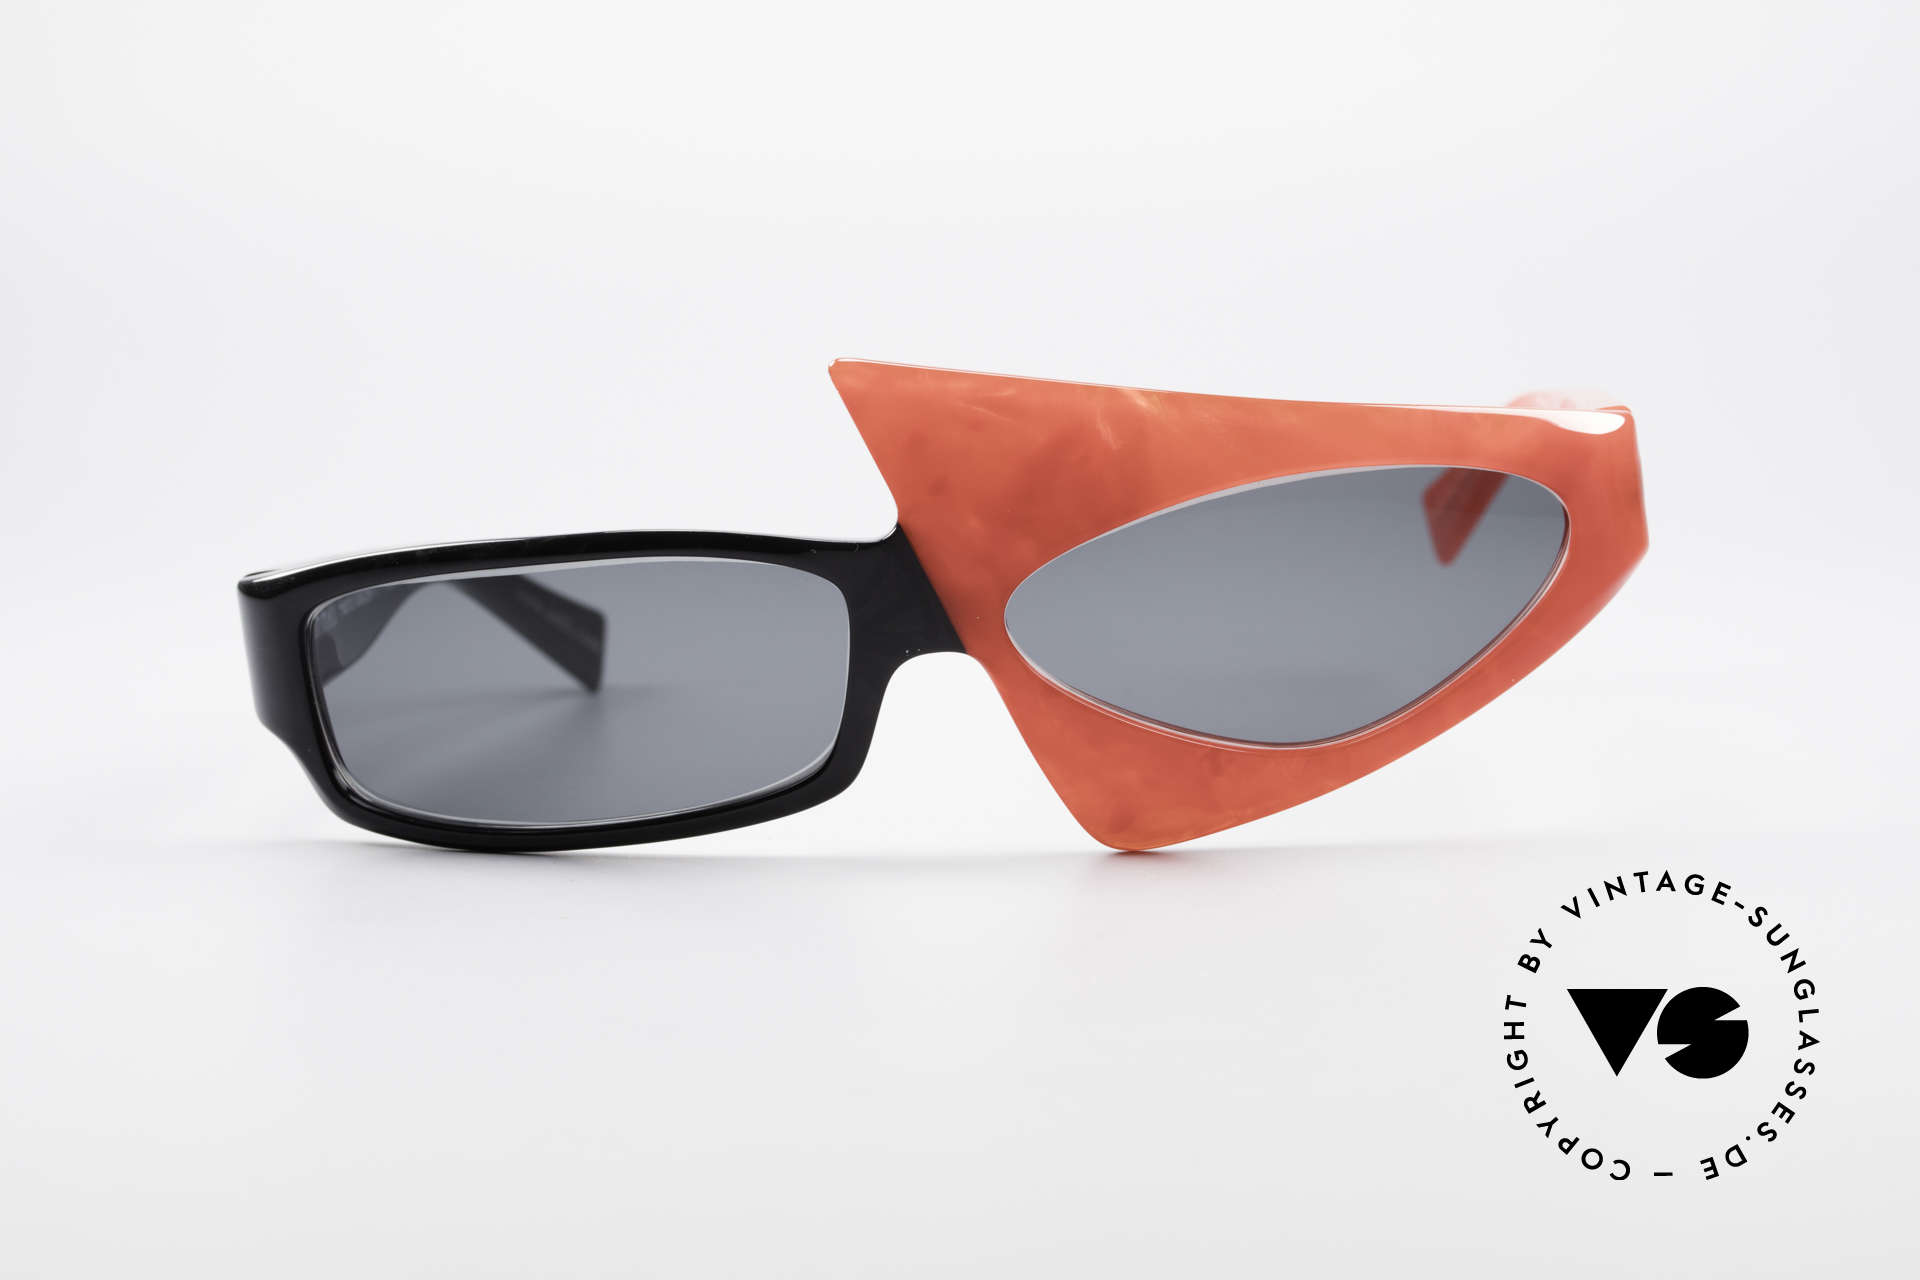 Sunglasses Alain Mikli 0005 Limited Special Edition 30 Years